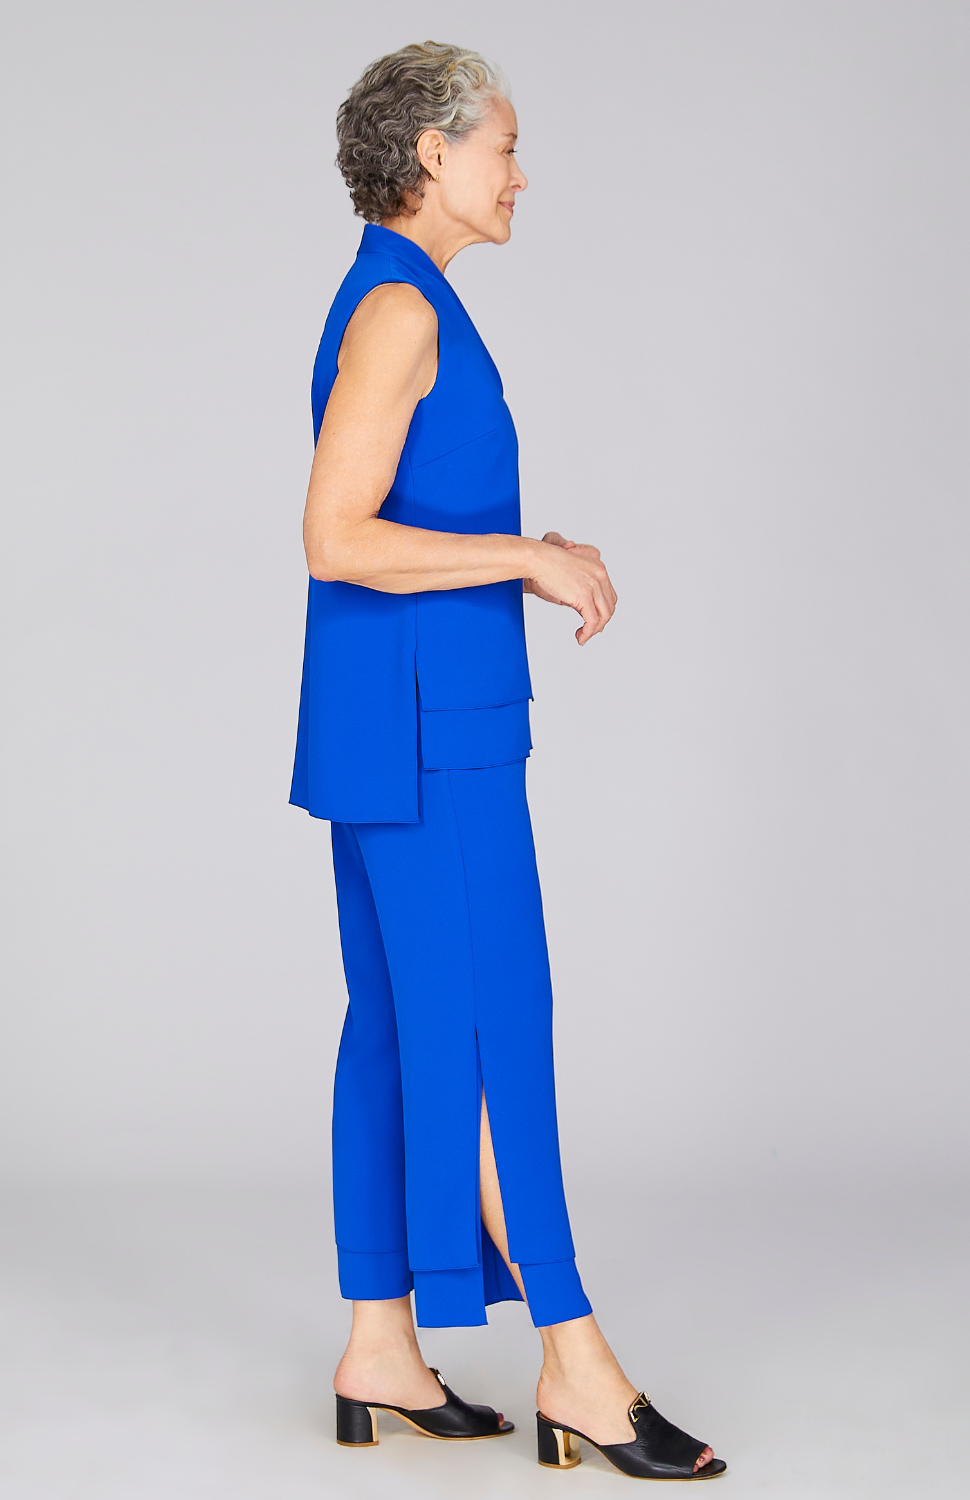 Nancy is 5'9" and wearing Cobalt in XS.